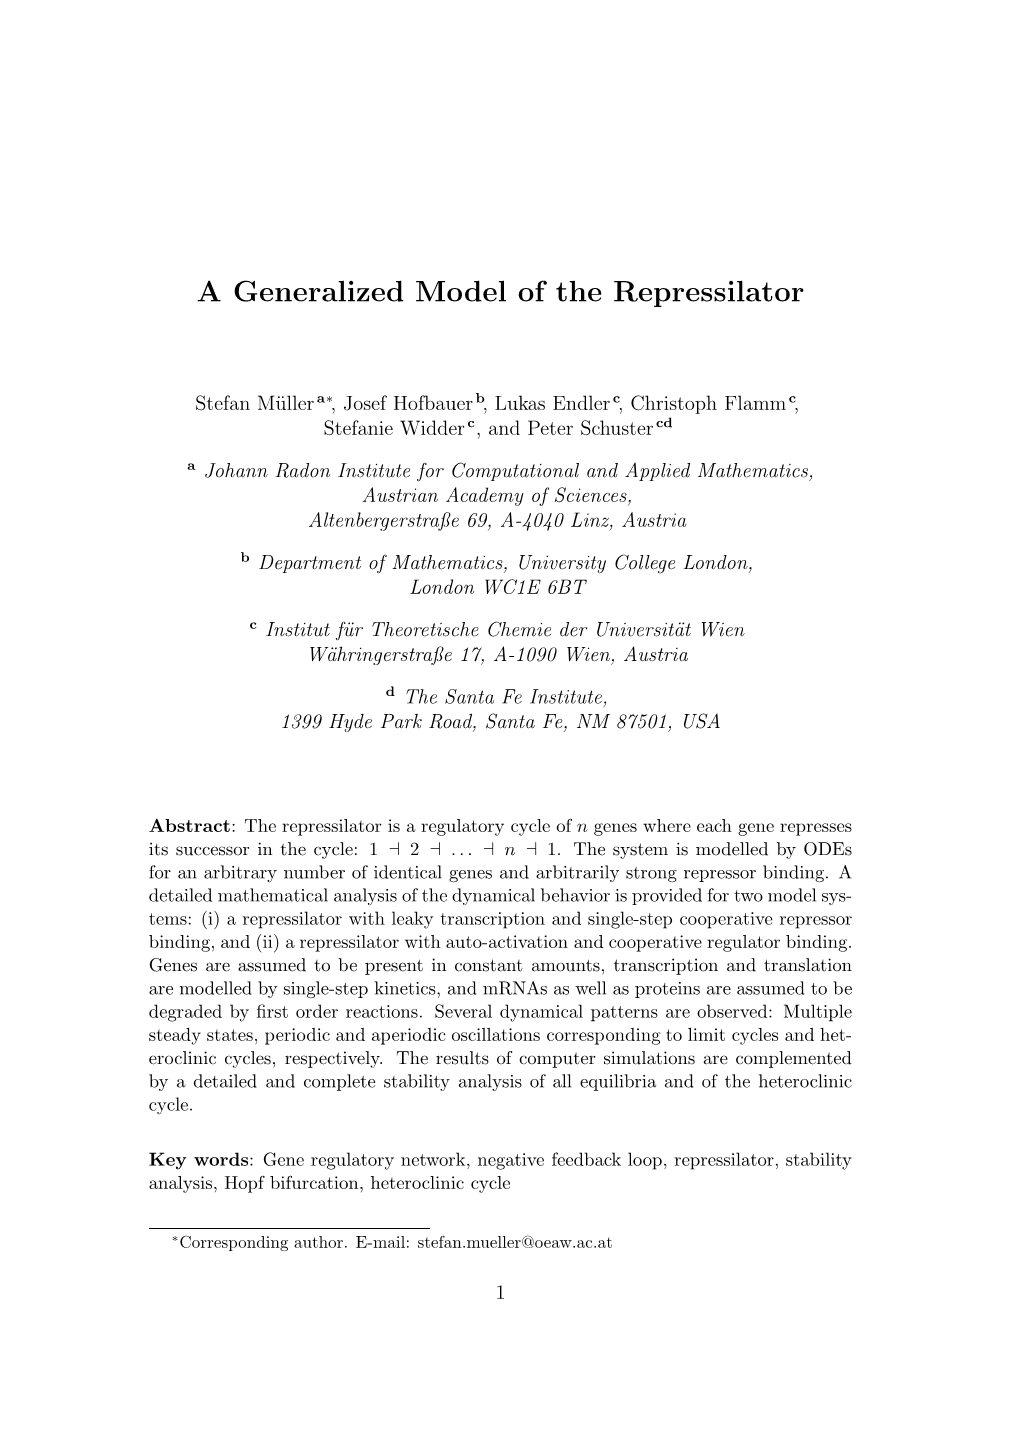 A Generalized Model of the Repressilator